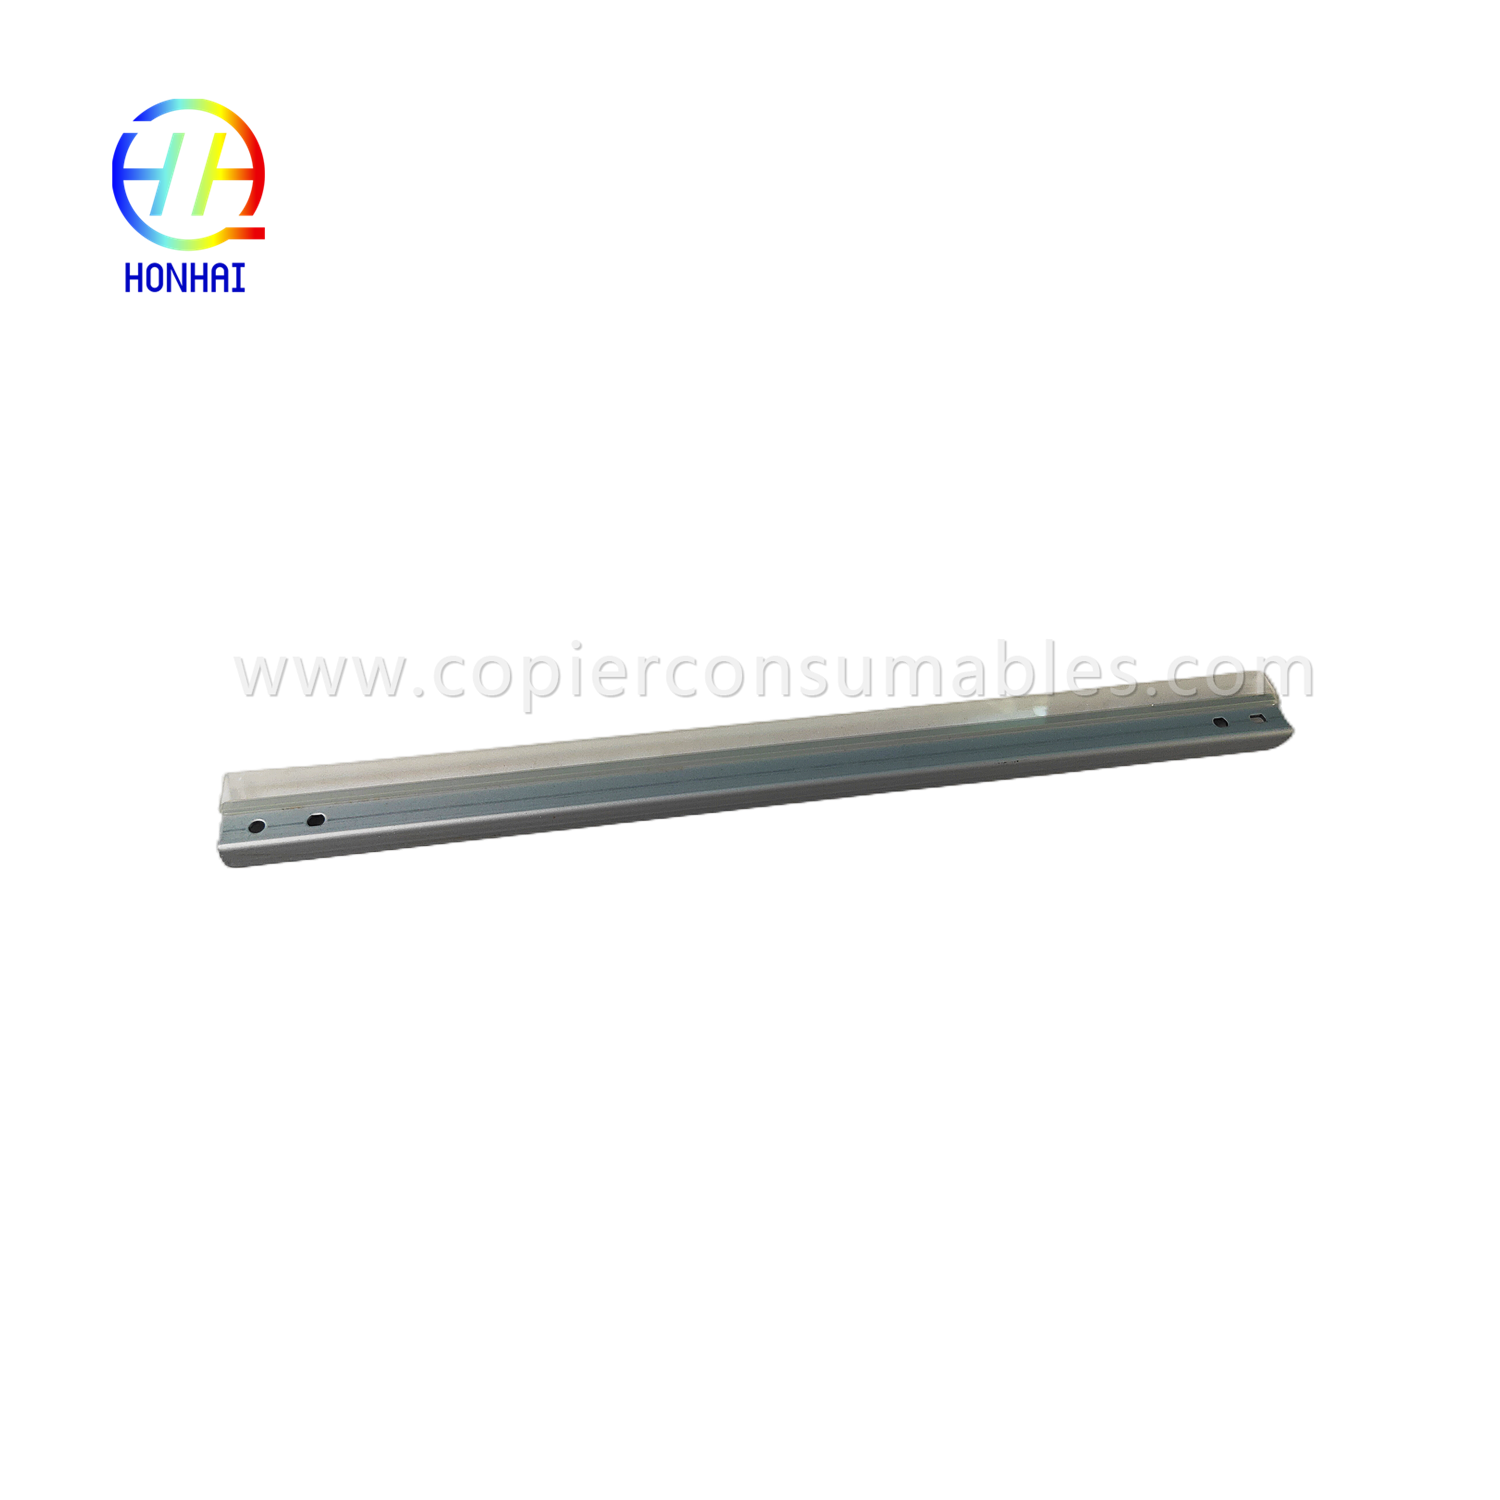 https://c585.goodo.net/drum-cleaning-blade-for-ricoh-mp-2554-3054-3554-4054-5054-6054-ምርት/